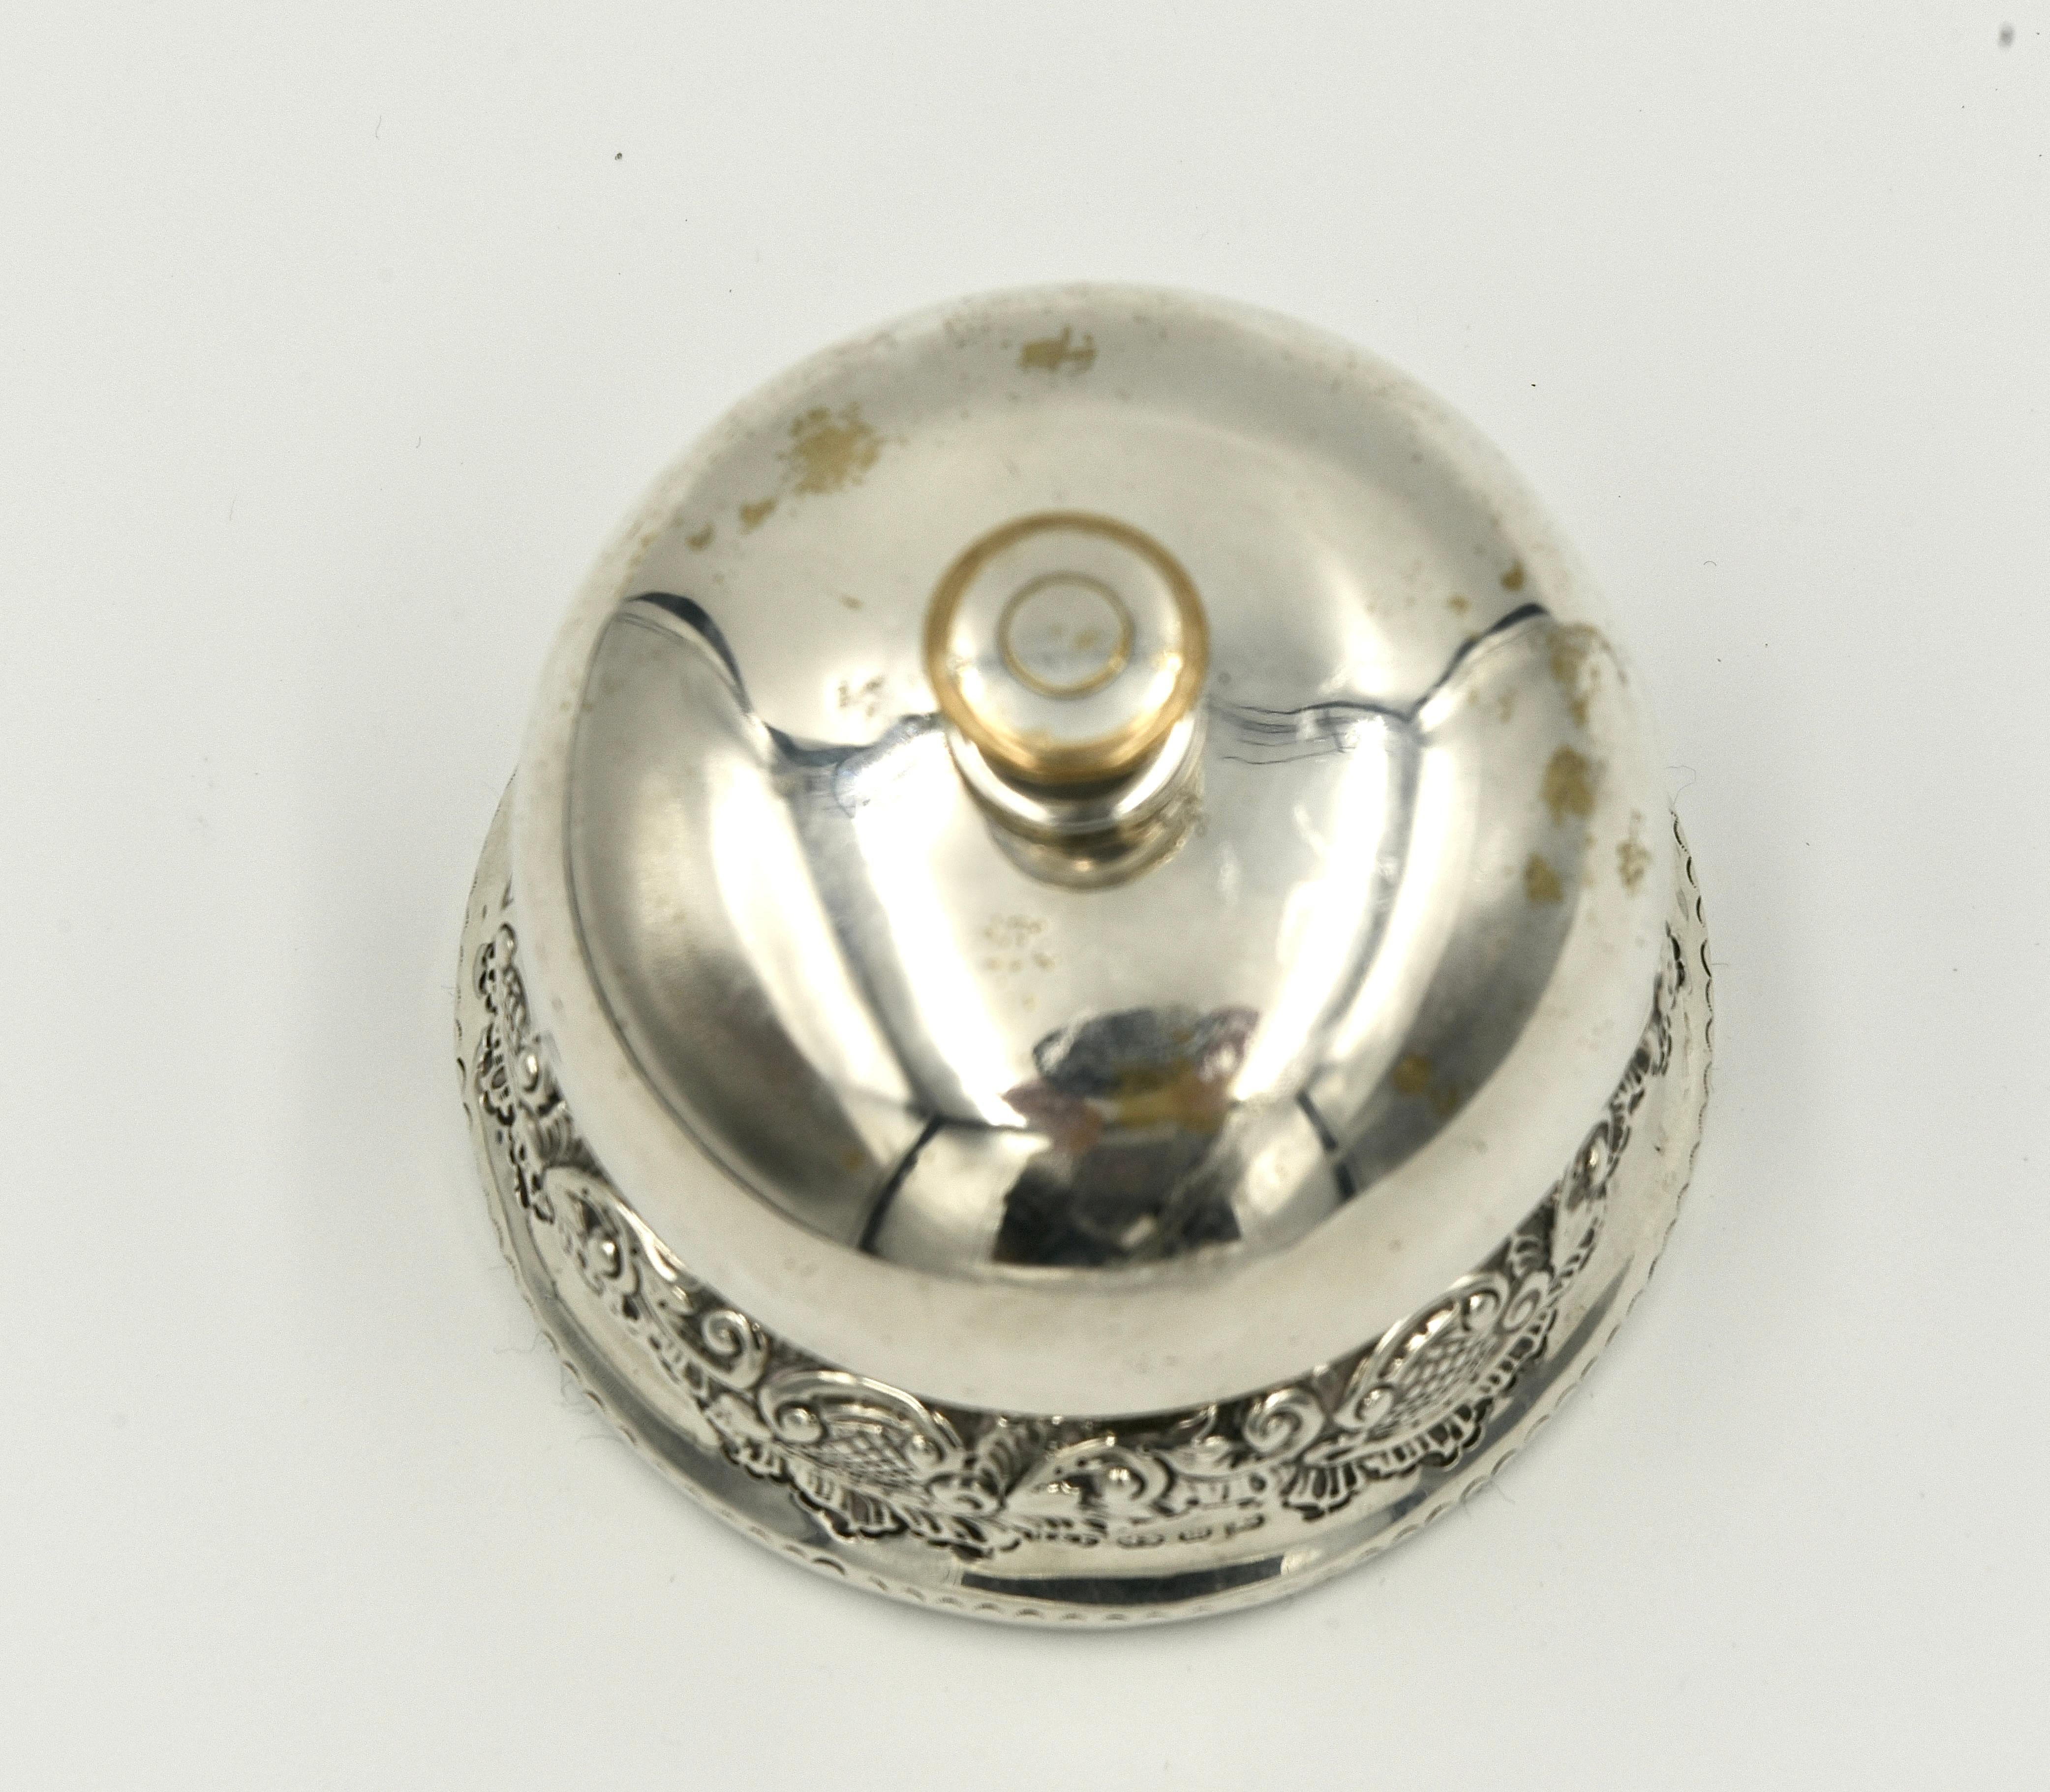 Rococo 19th century English Sterling silver Desk bell reception service bell  For Sale